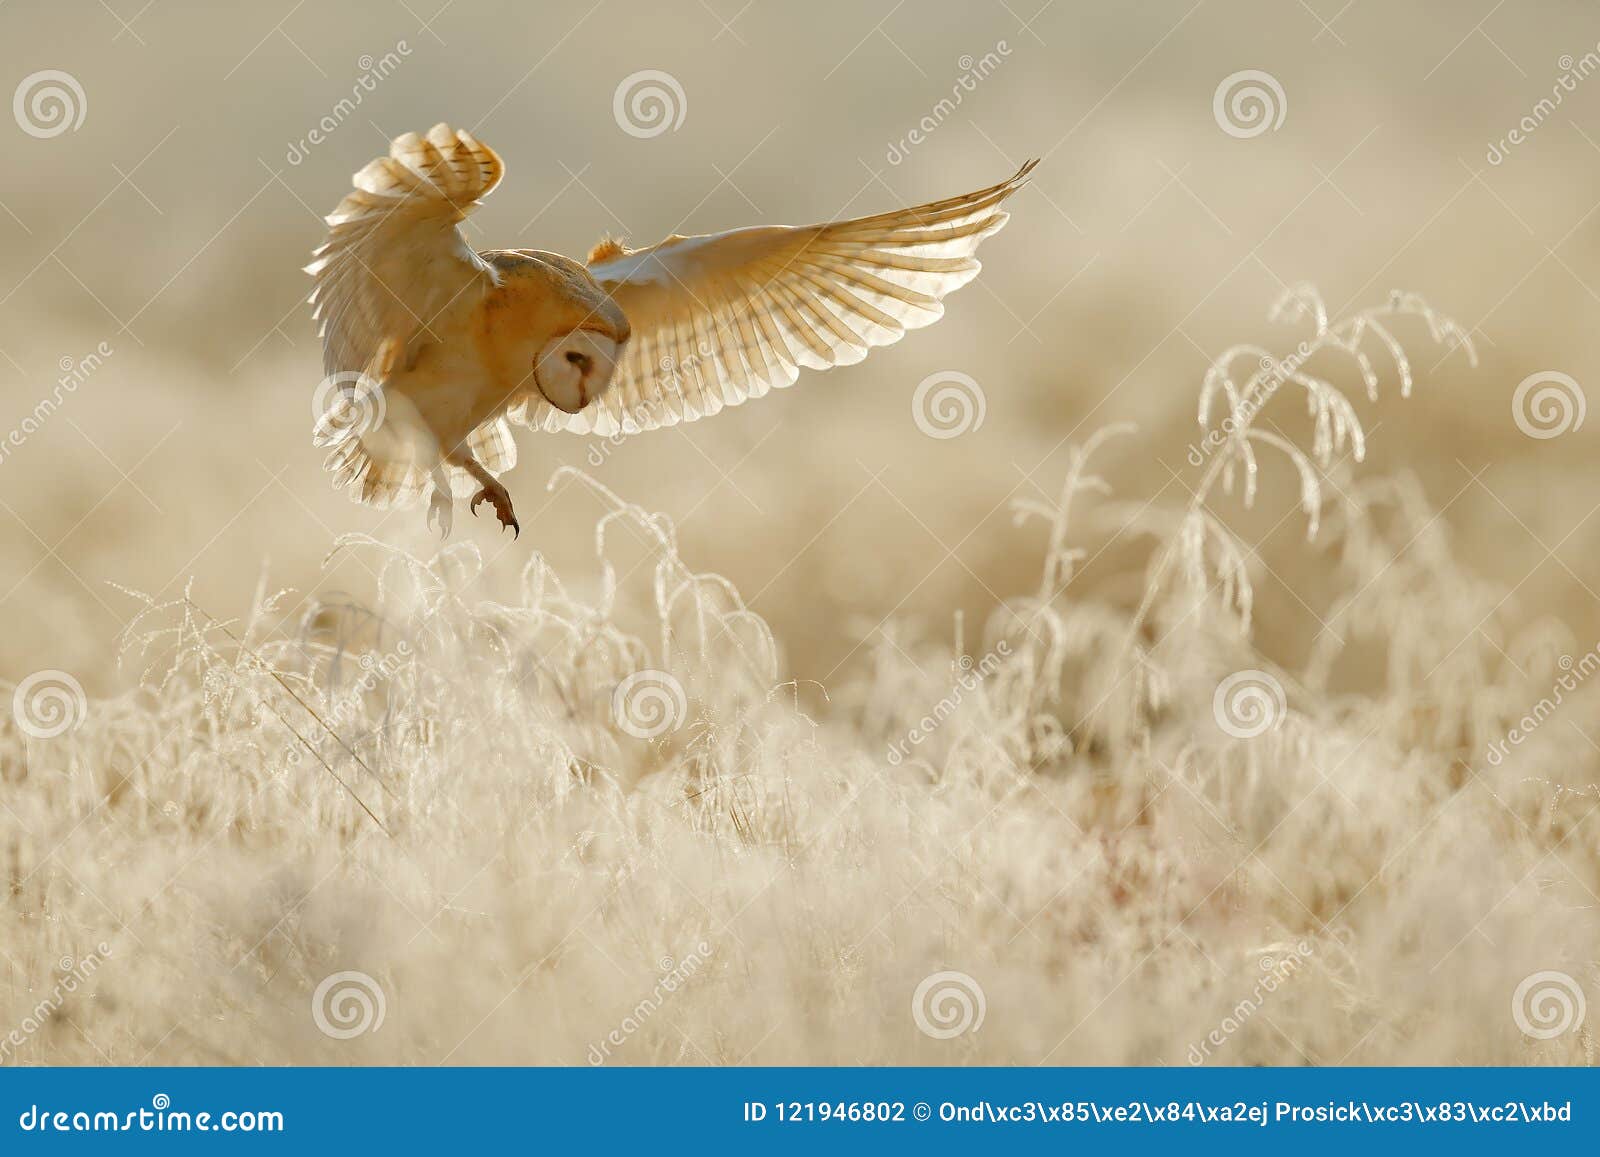 owl fly with open wings. barn owl, tyto alba, flying above rime white grass in the morning. wildlife bird scene from nature. cold